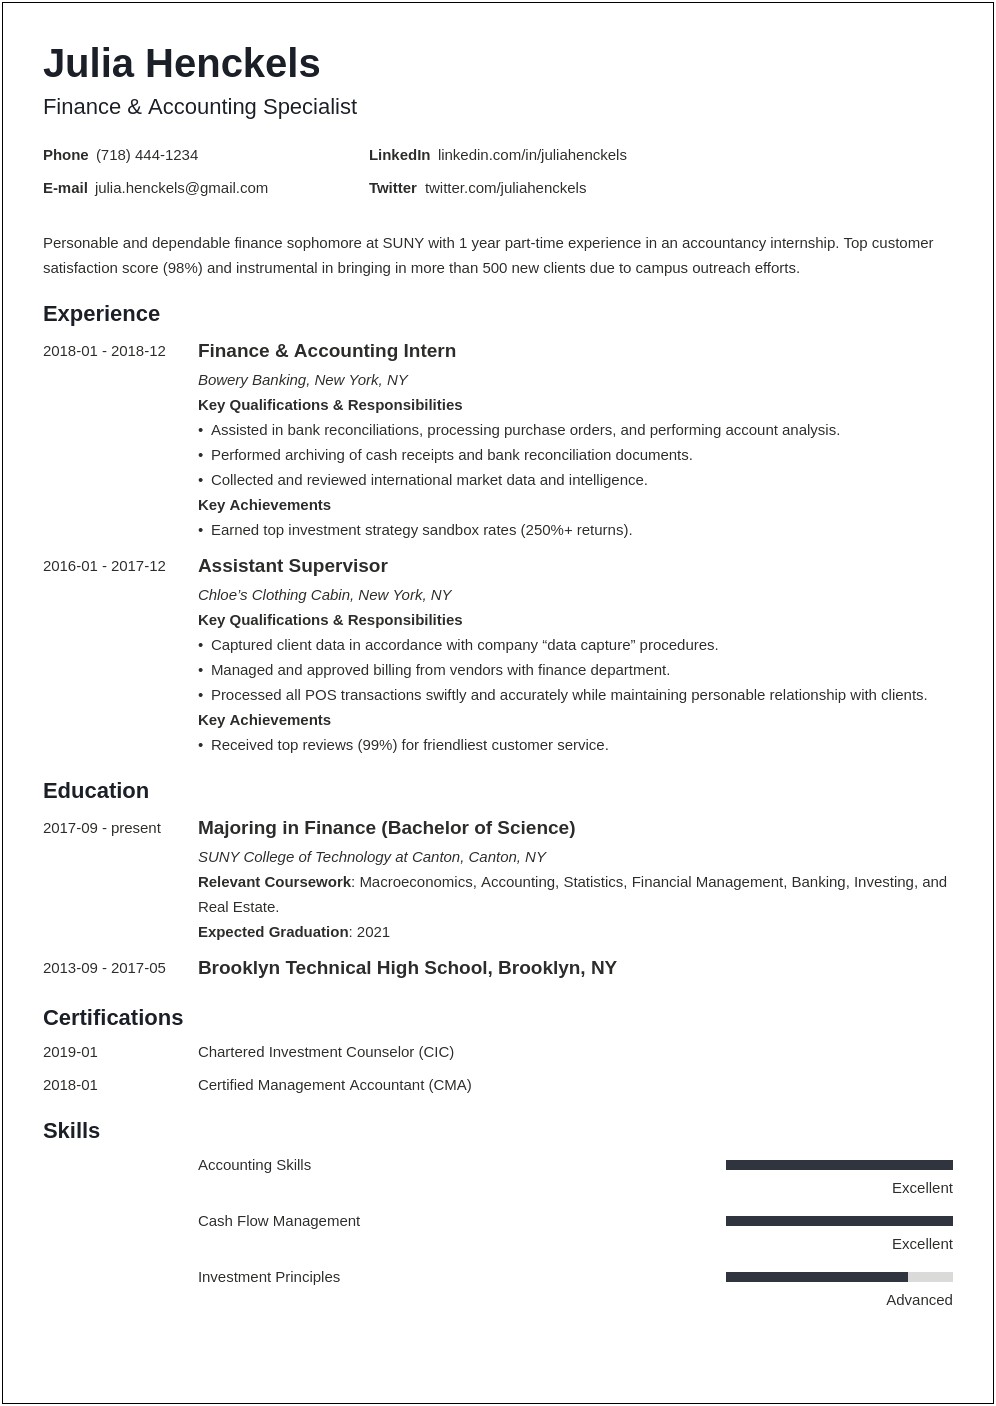 Are College Courses Skills For Resume